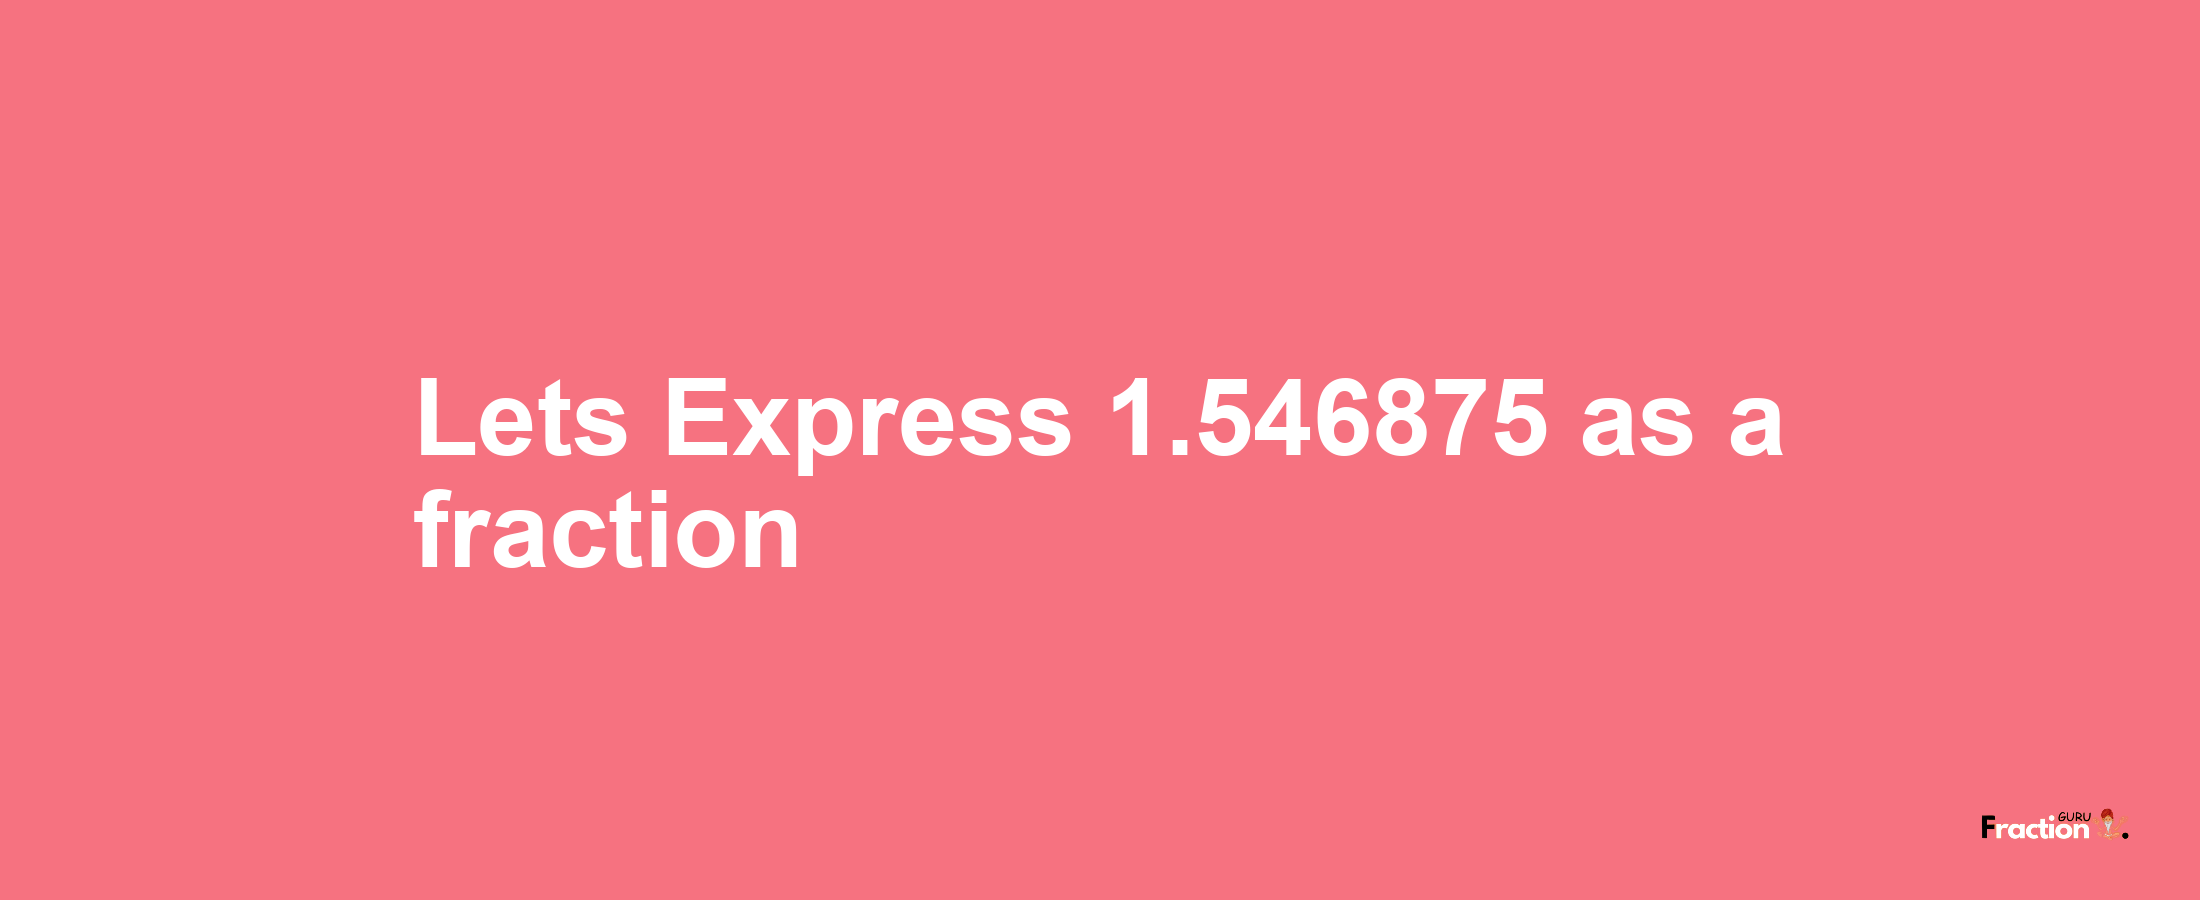 Lets Express 1.546875 as afraction